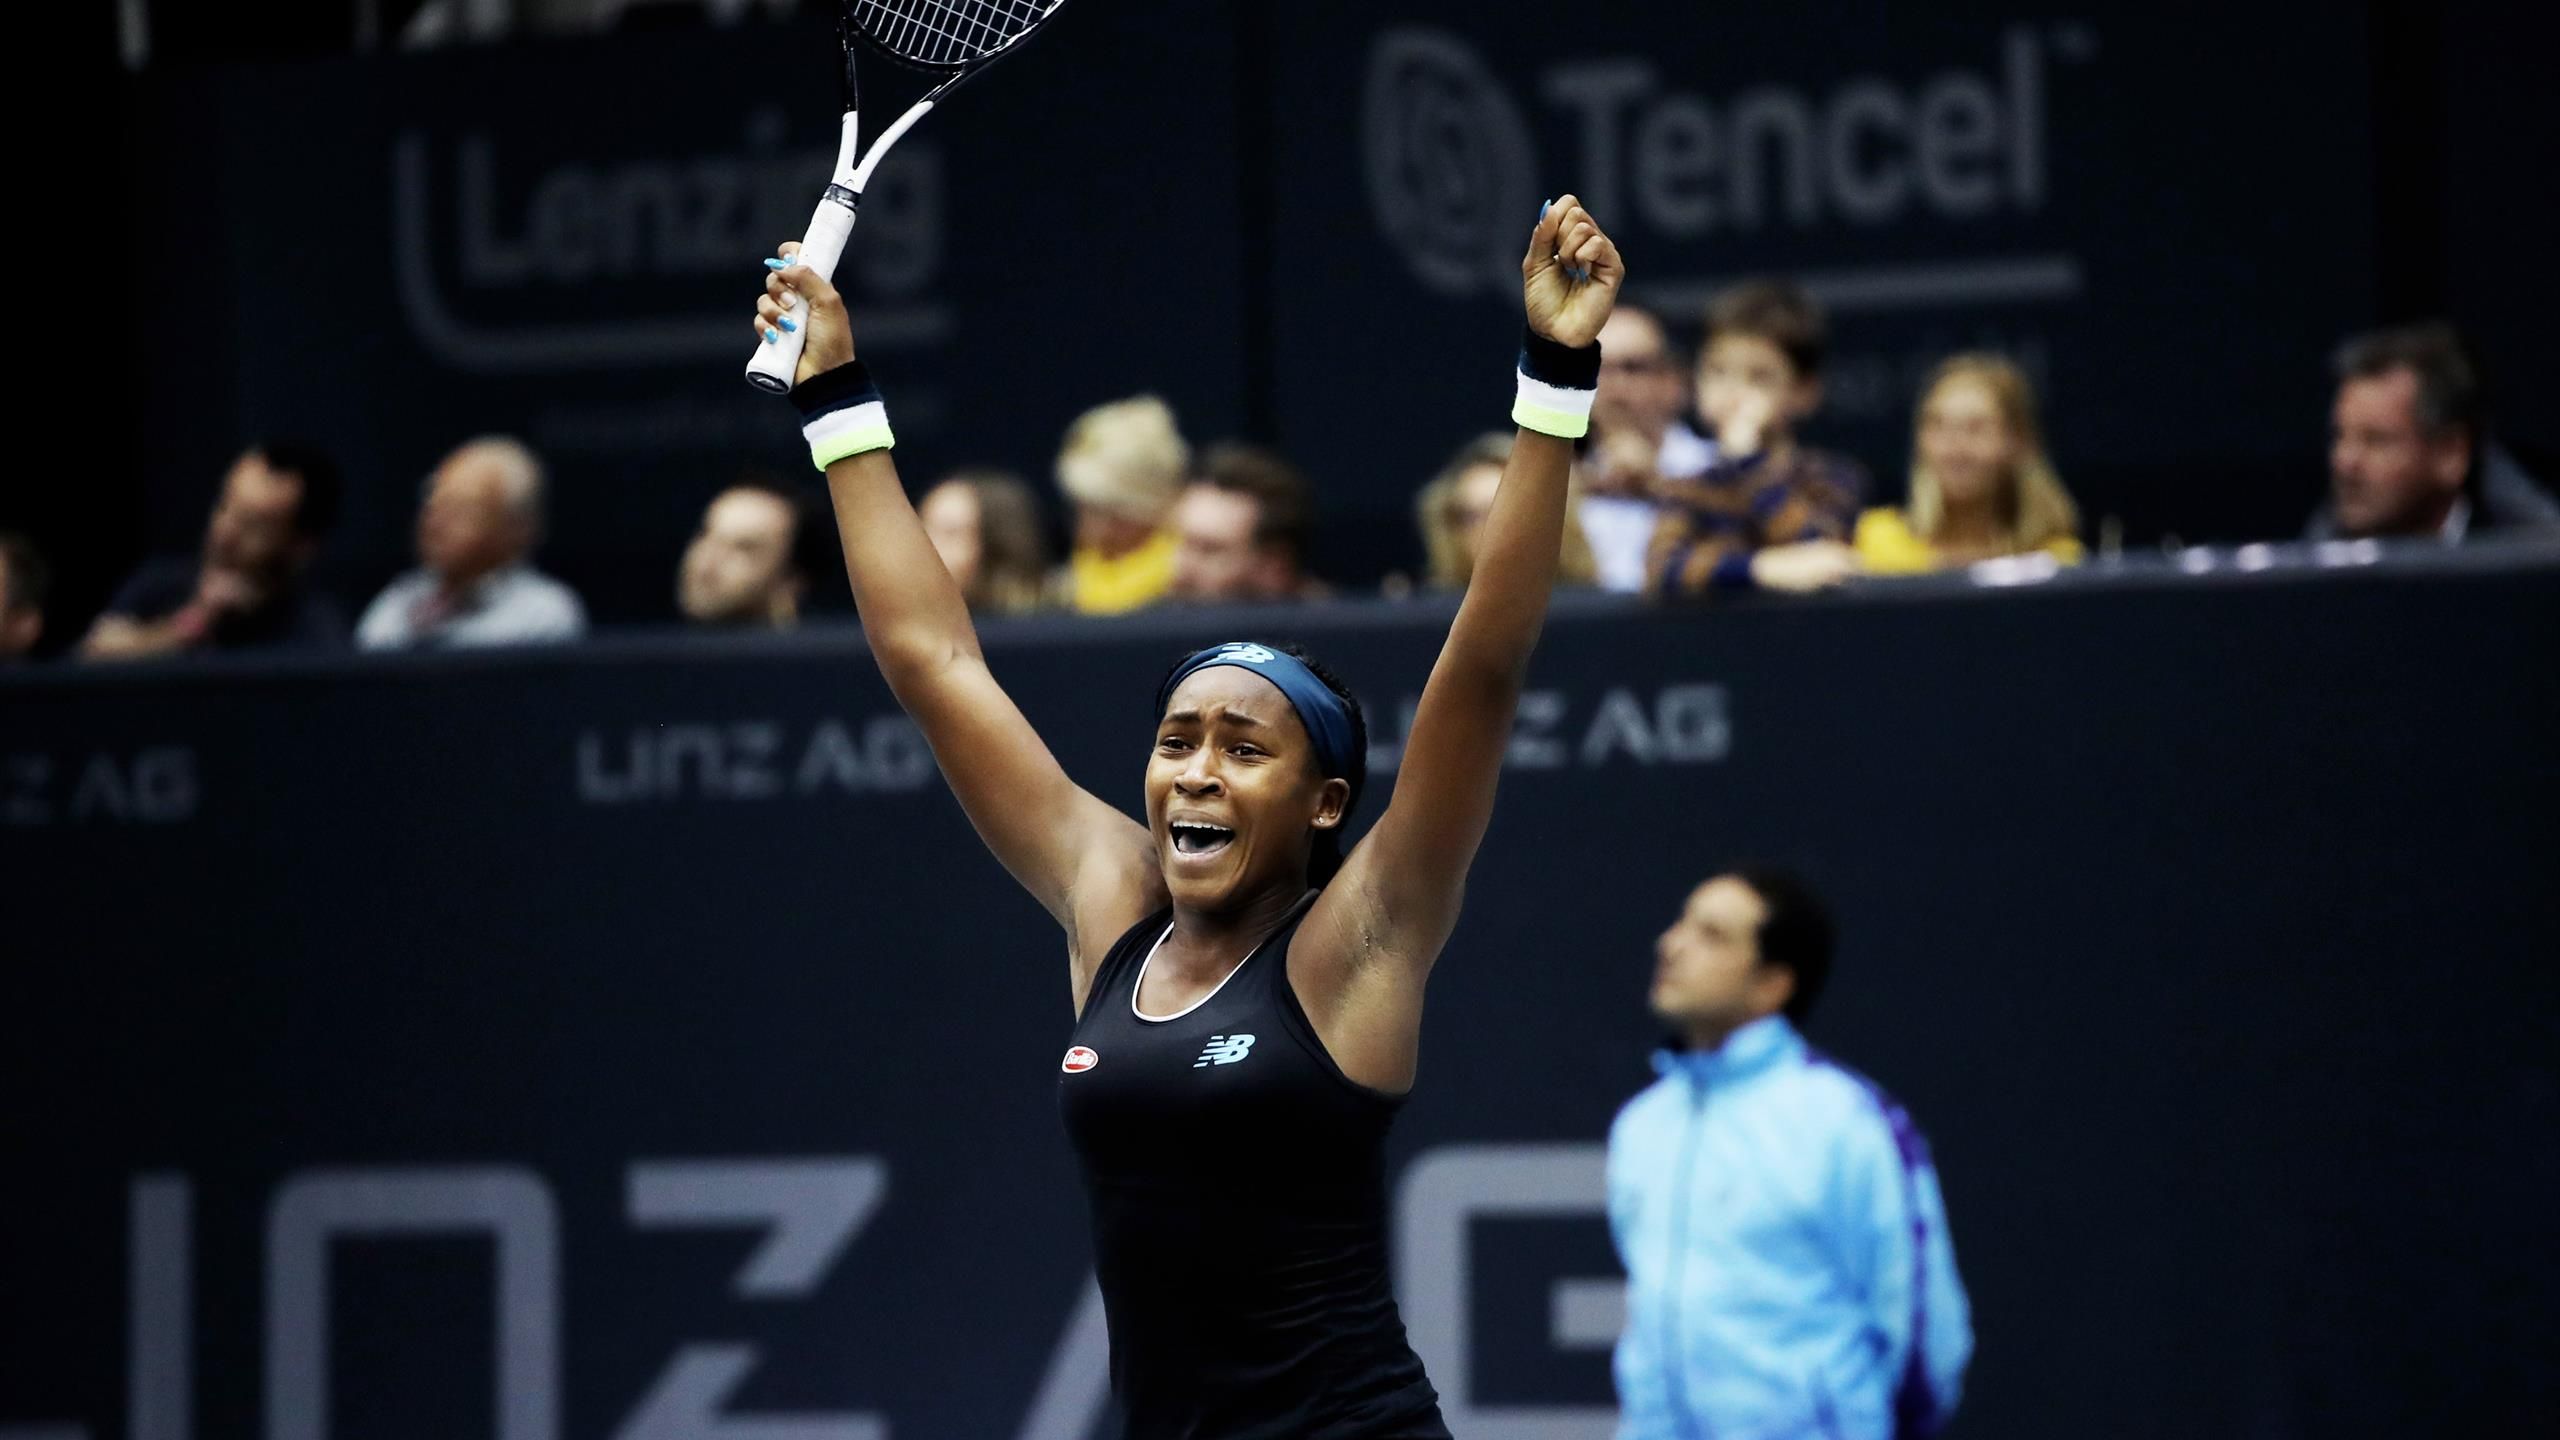 Tennis news - 15-year-old Coco Gauff wins first WTA Tour title with victory over Ostapenko in Linz